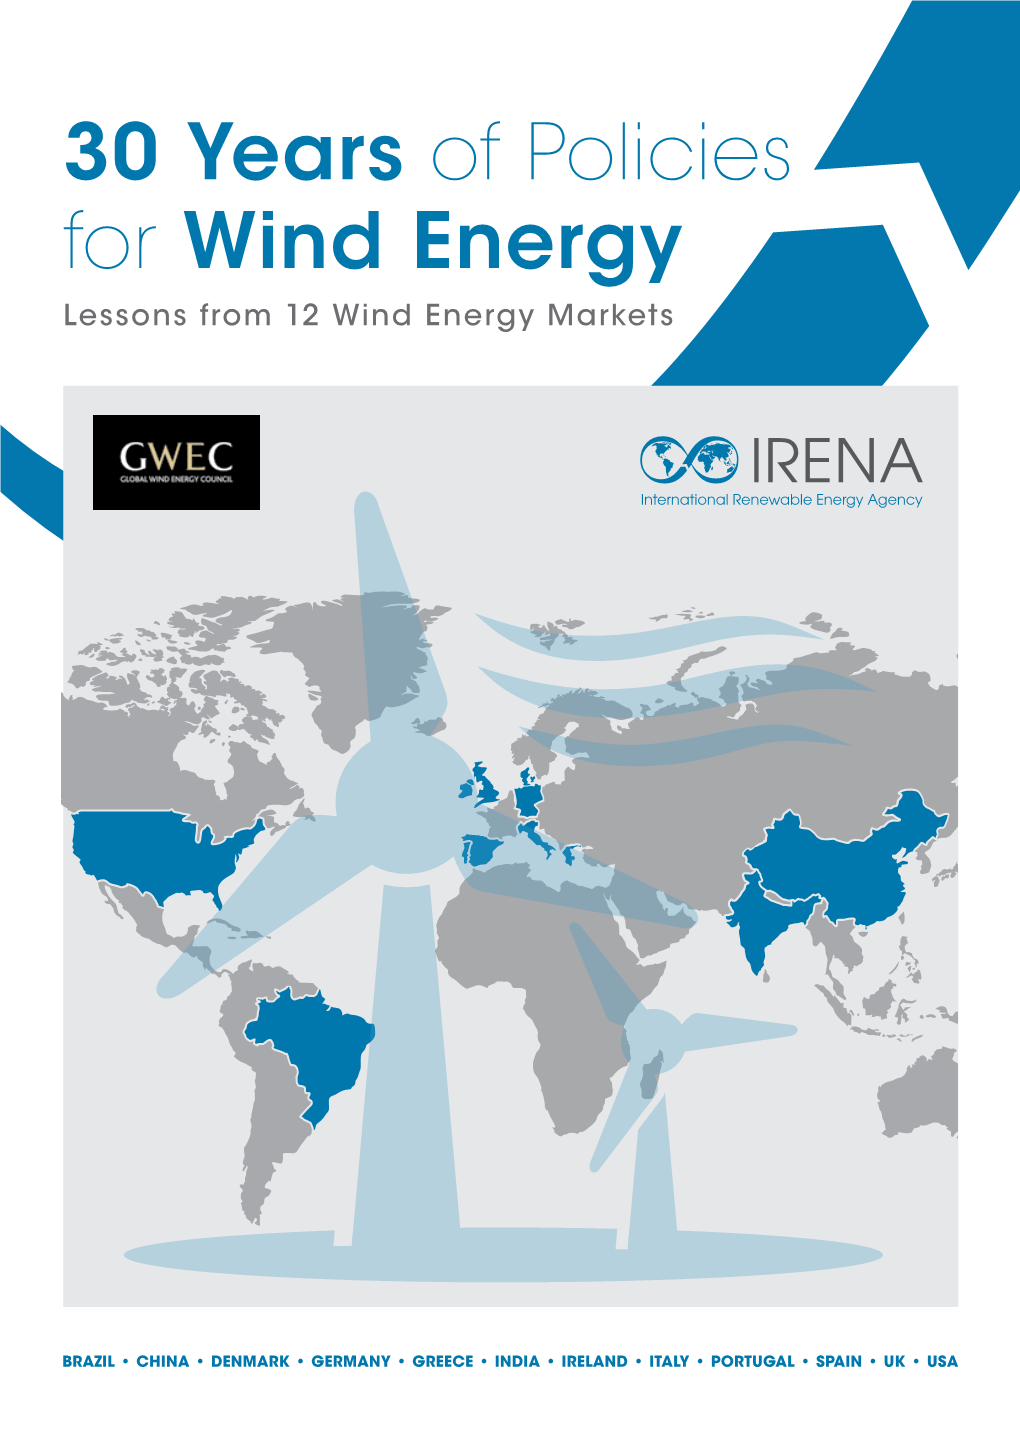 30 Years of Policies for Wind Energy Lessons from 12 Wind Energy Markets